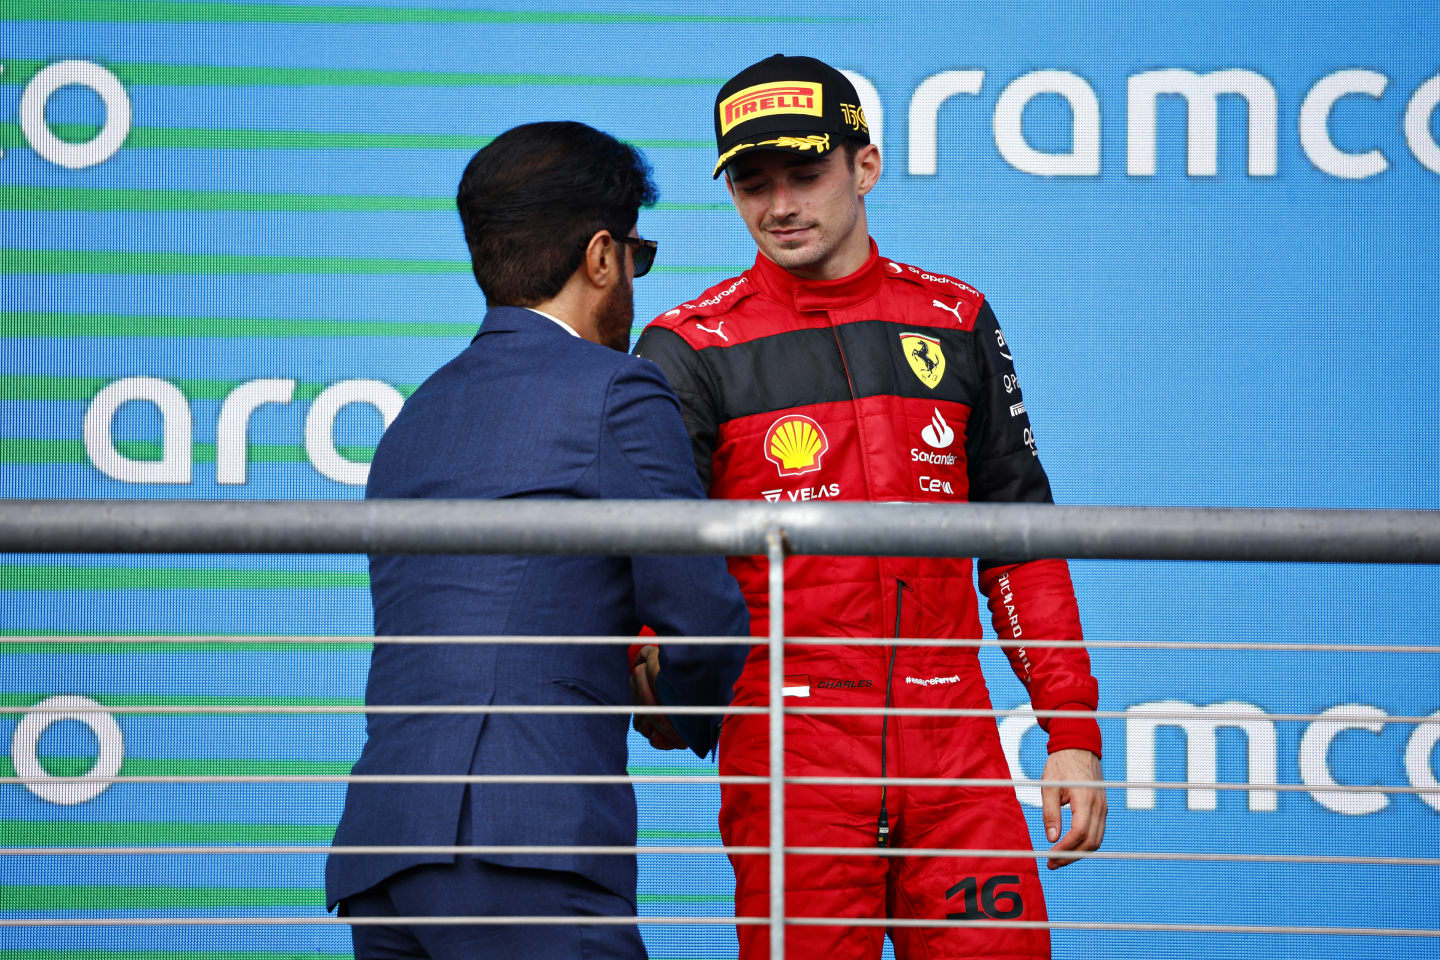 AUSTIN, TEXAS - OCTOBER 23: Third placed Charles Leclerc of Monaco and Ferrari celebrates on the podium following the F1 Grand Prix of USA at Circuit of The Americas on October 23, 2022 in Austin, Texas. (Photo by Chris Graythen/Getty Images)